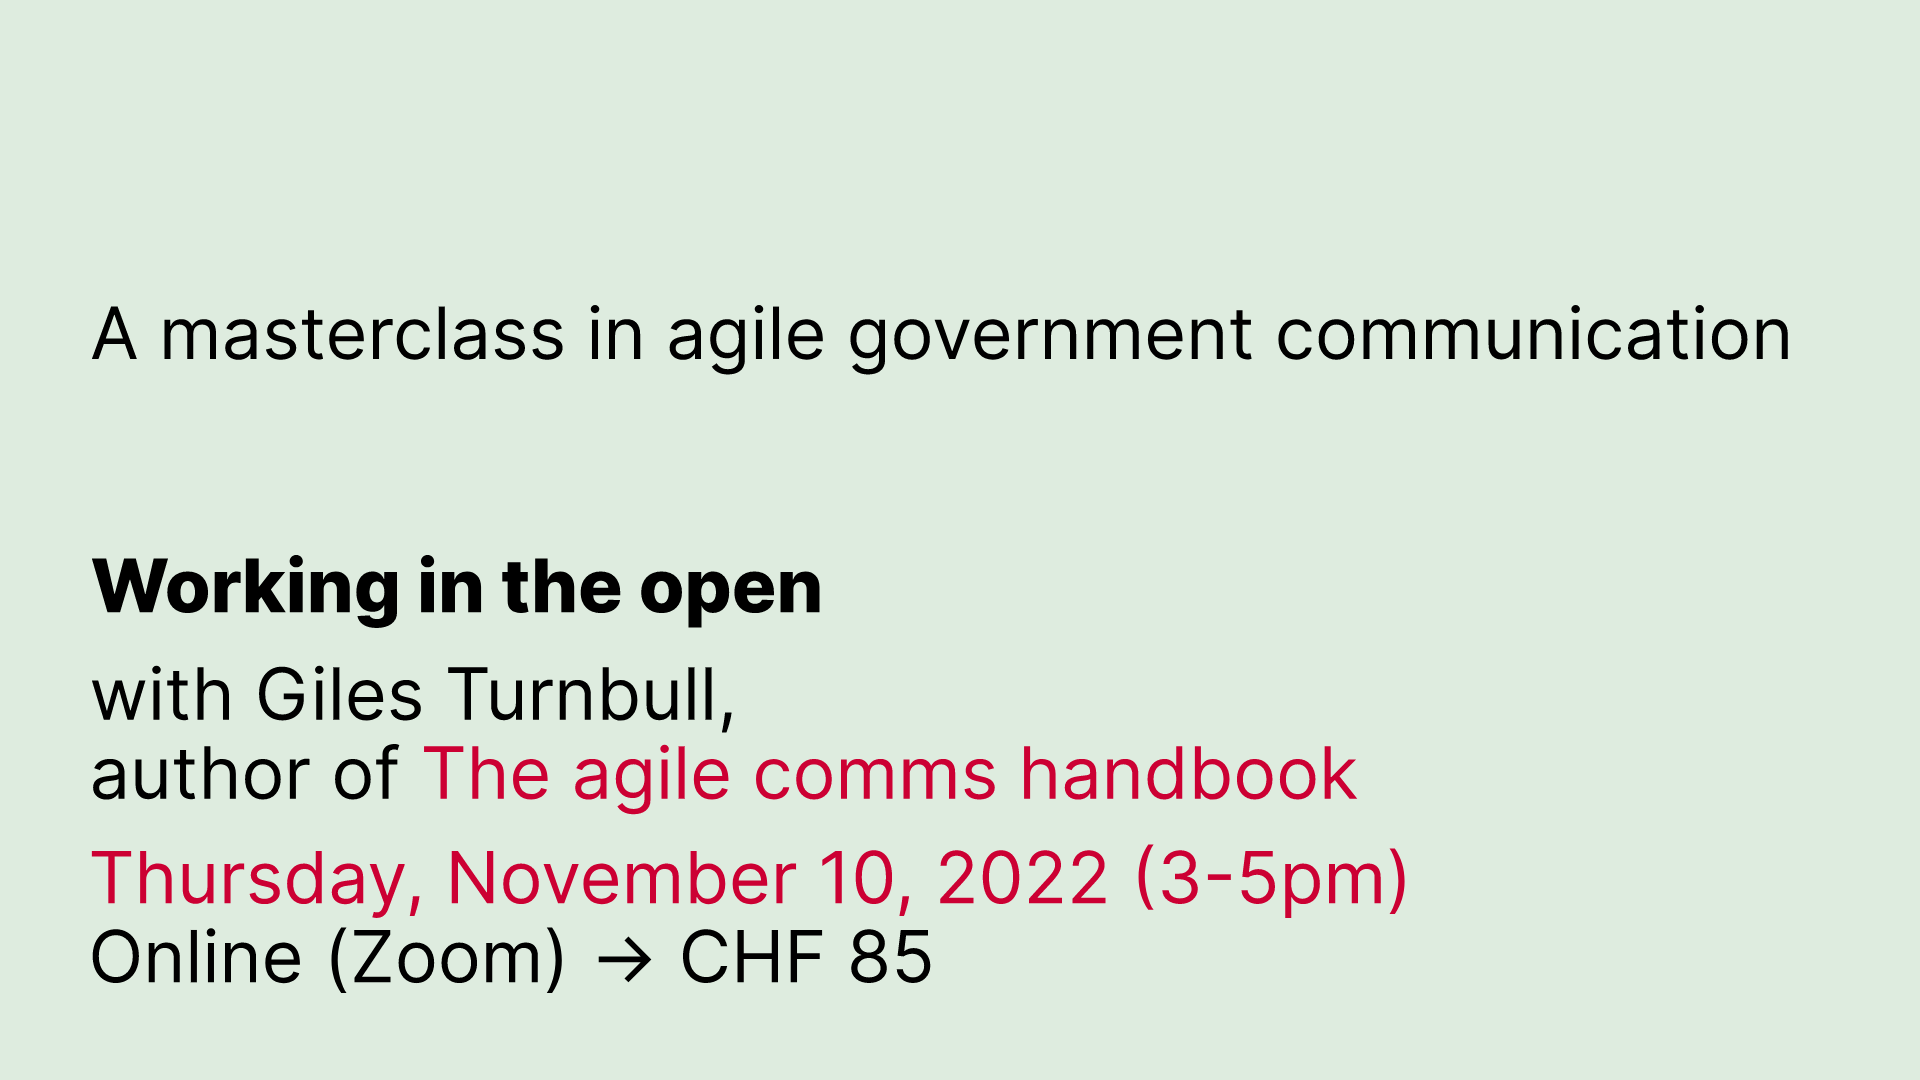 Giles Turnbull Masterclass on agile government communication